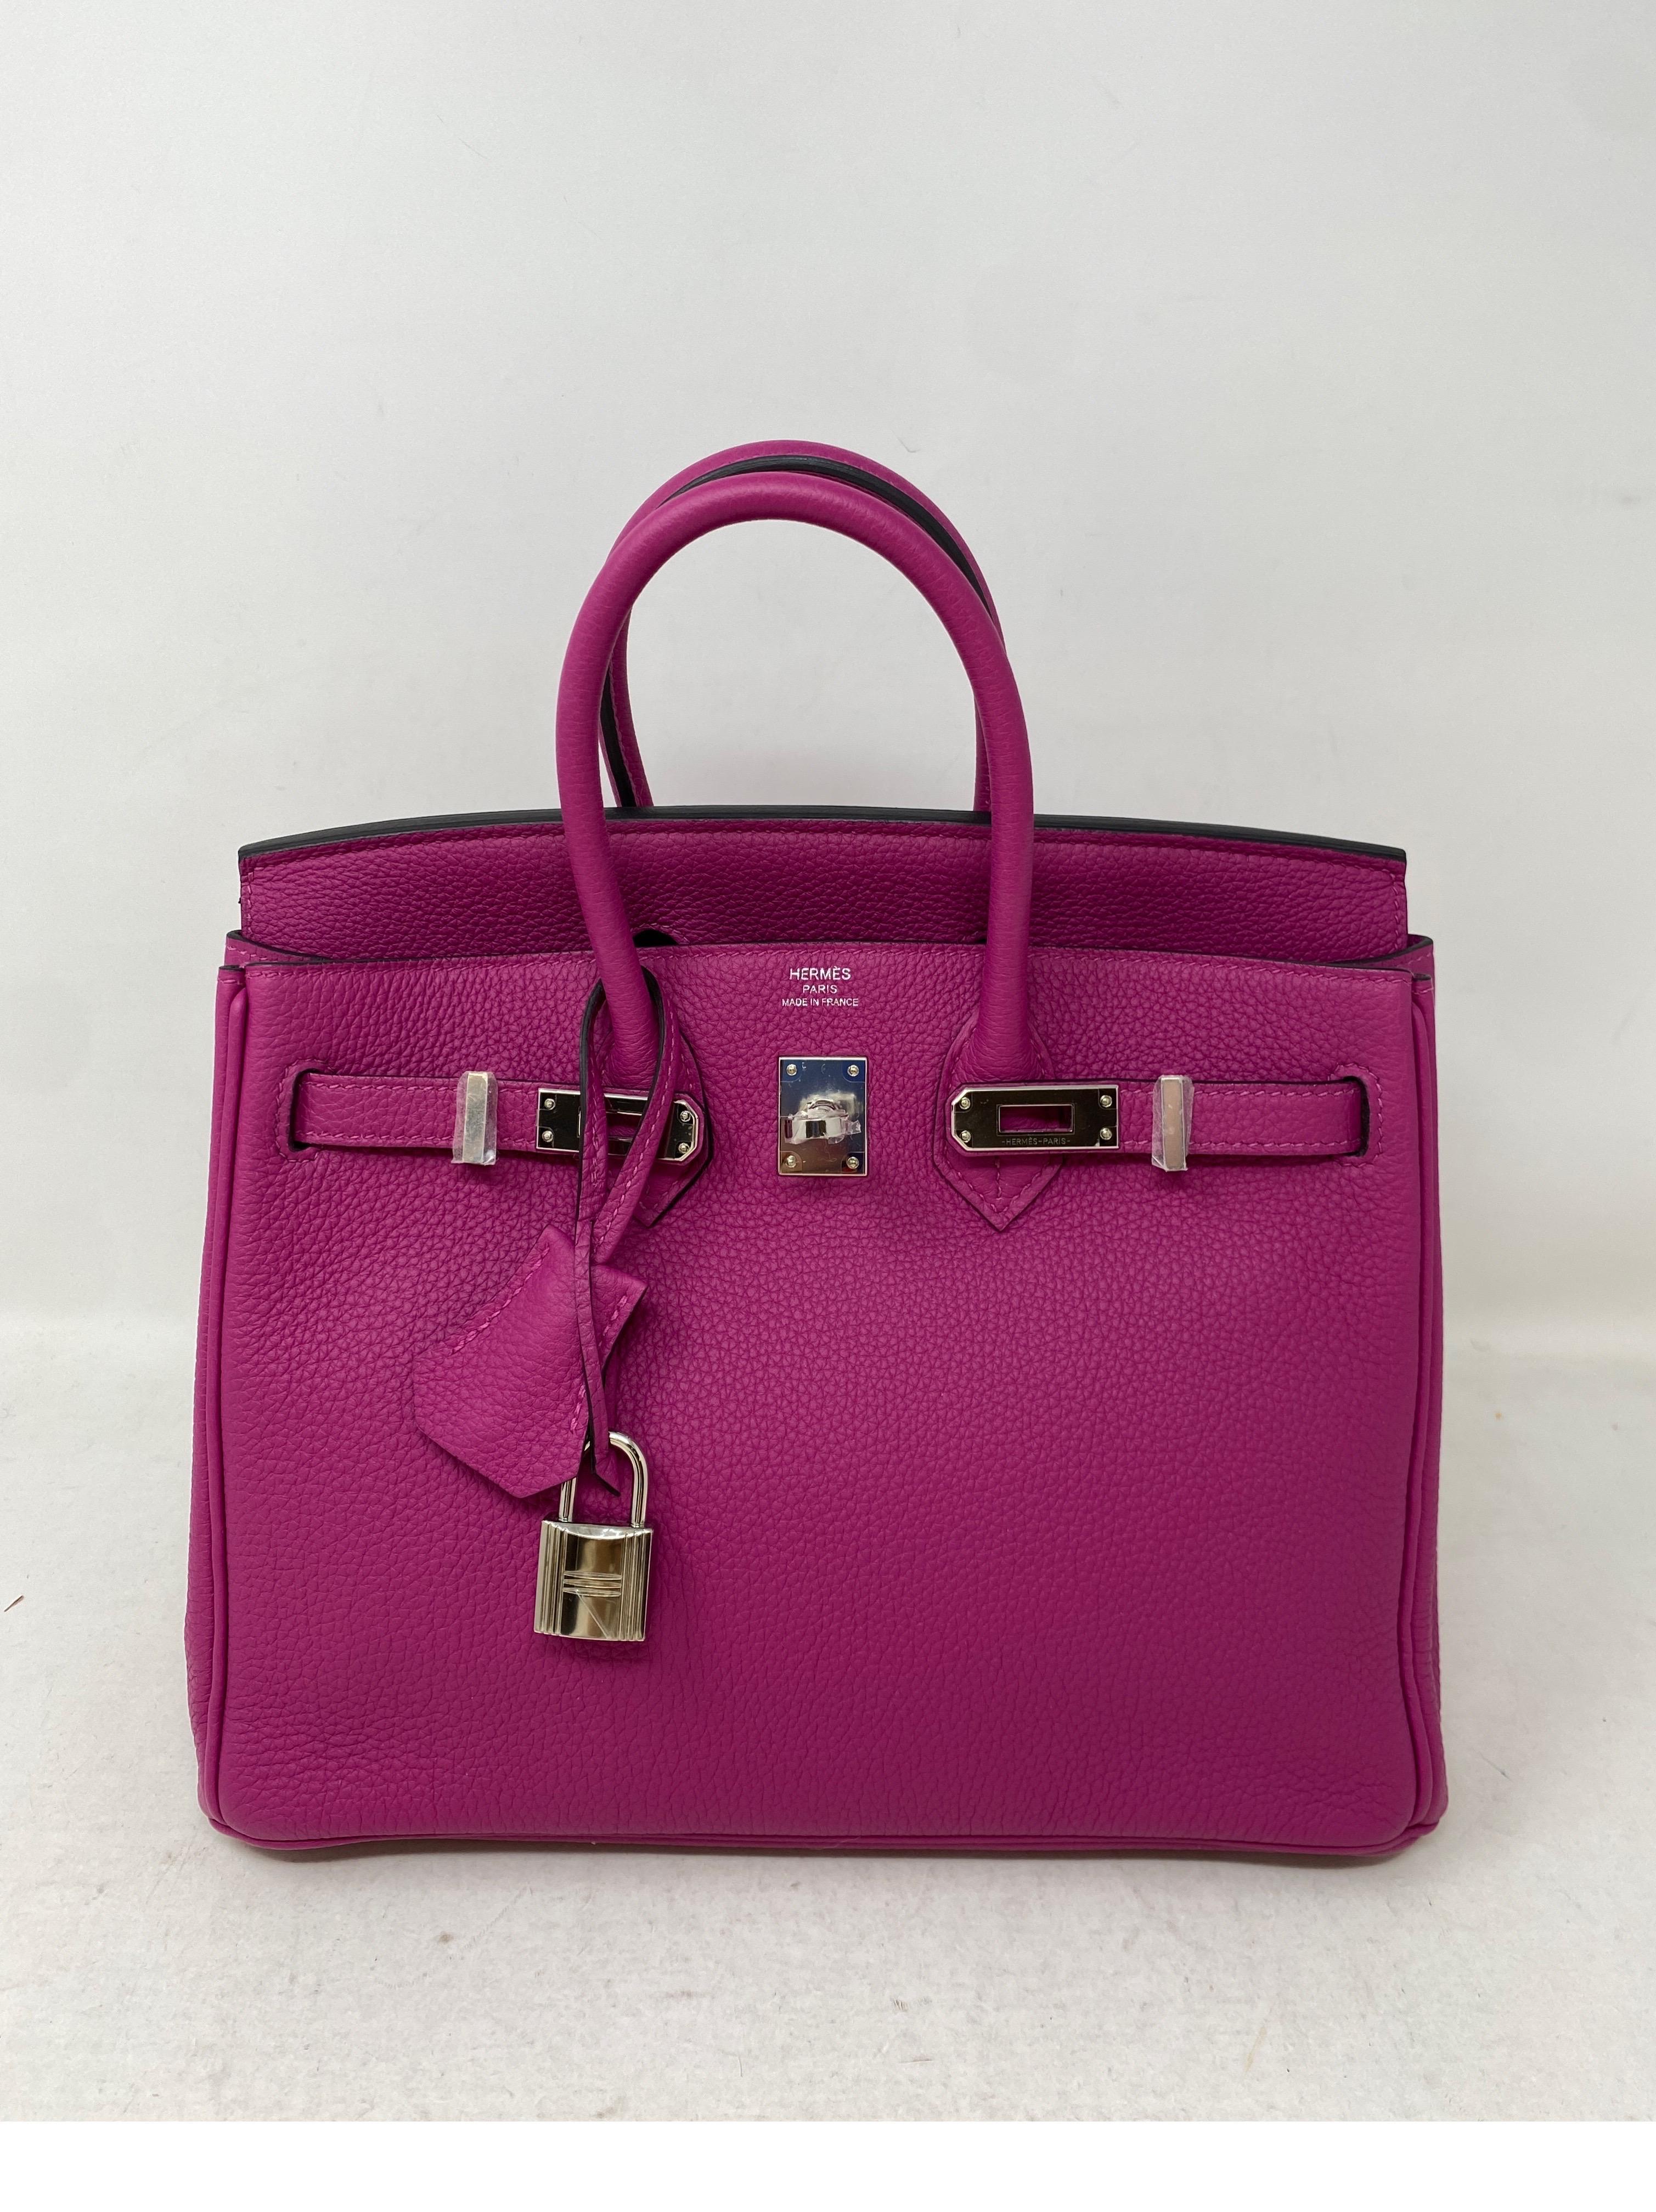 Hermes Purple Poudre Birkin 25 Bag. Rare gorgeous color. Palladium hardware. Excellent condition. Like new. Never used. Includes full set. Includes clochette, lock, keys, rain jacket, dust bag and box. Guaranteed authentic. Great color to add to